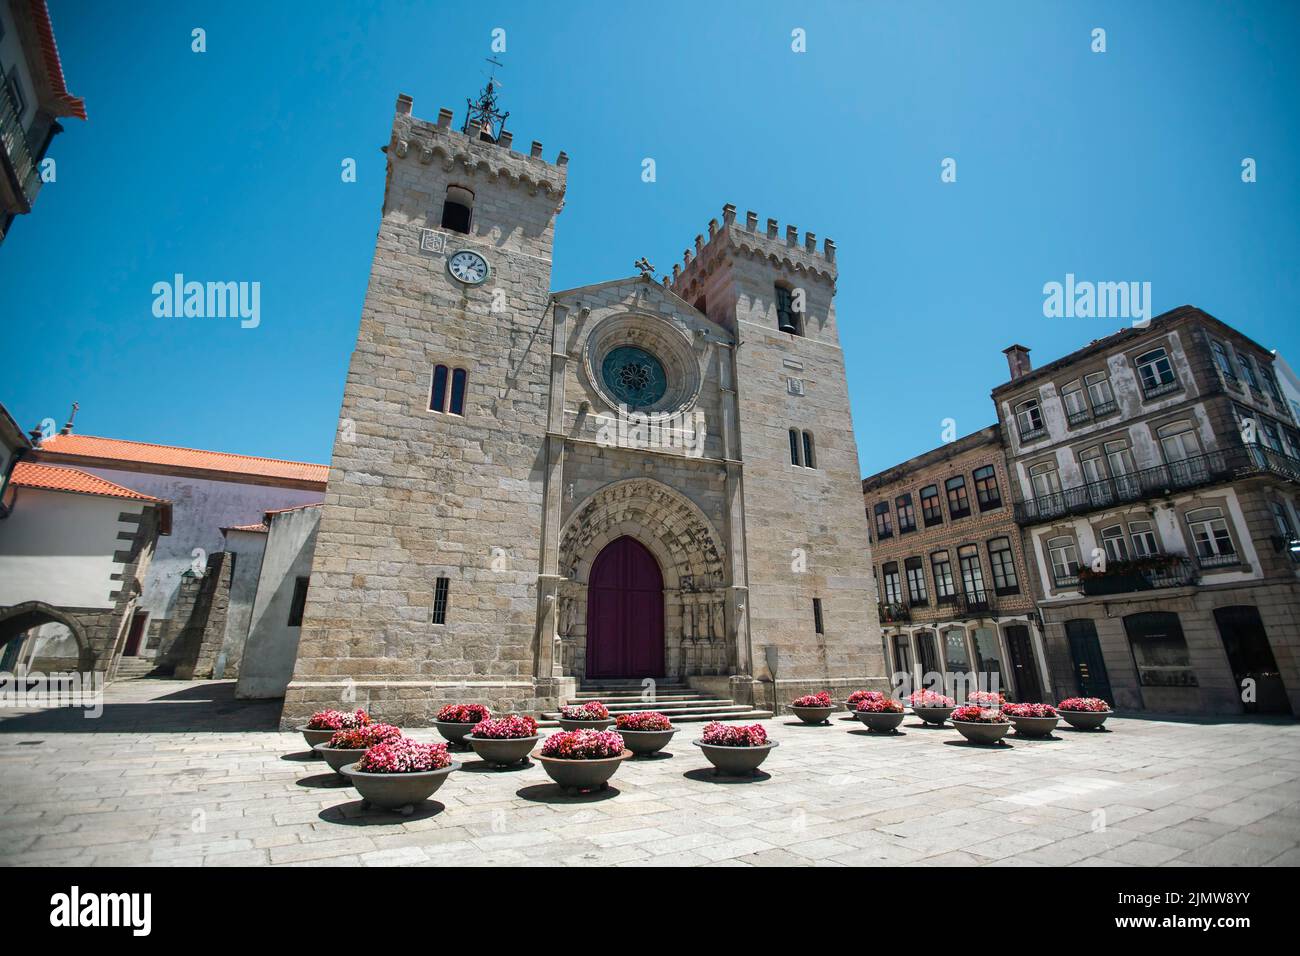 The Cathedral of Viana do Castelo, Portugal. Stock Photo